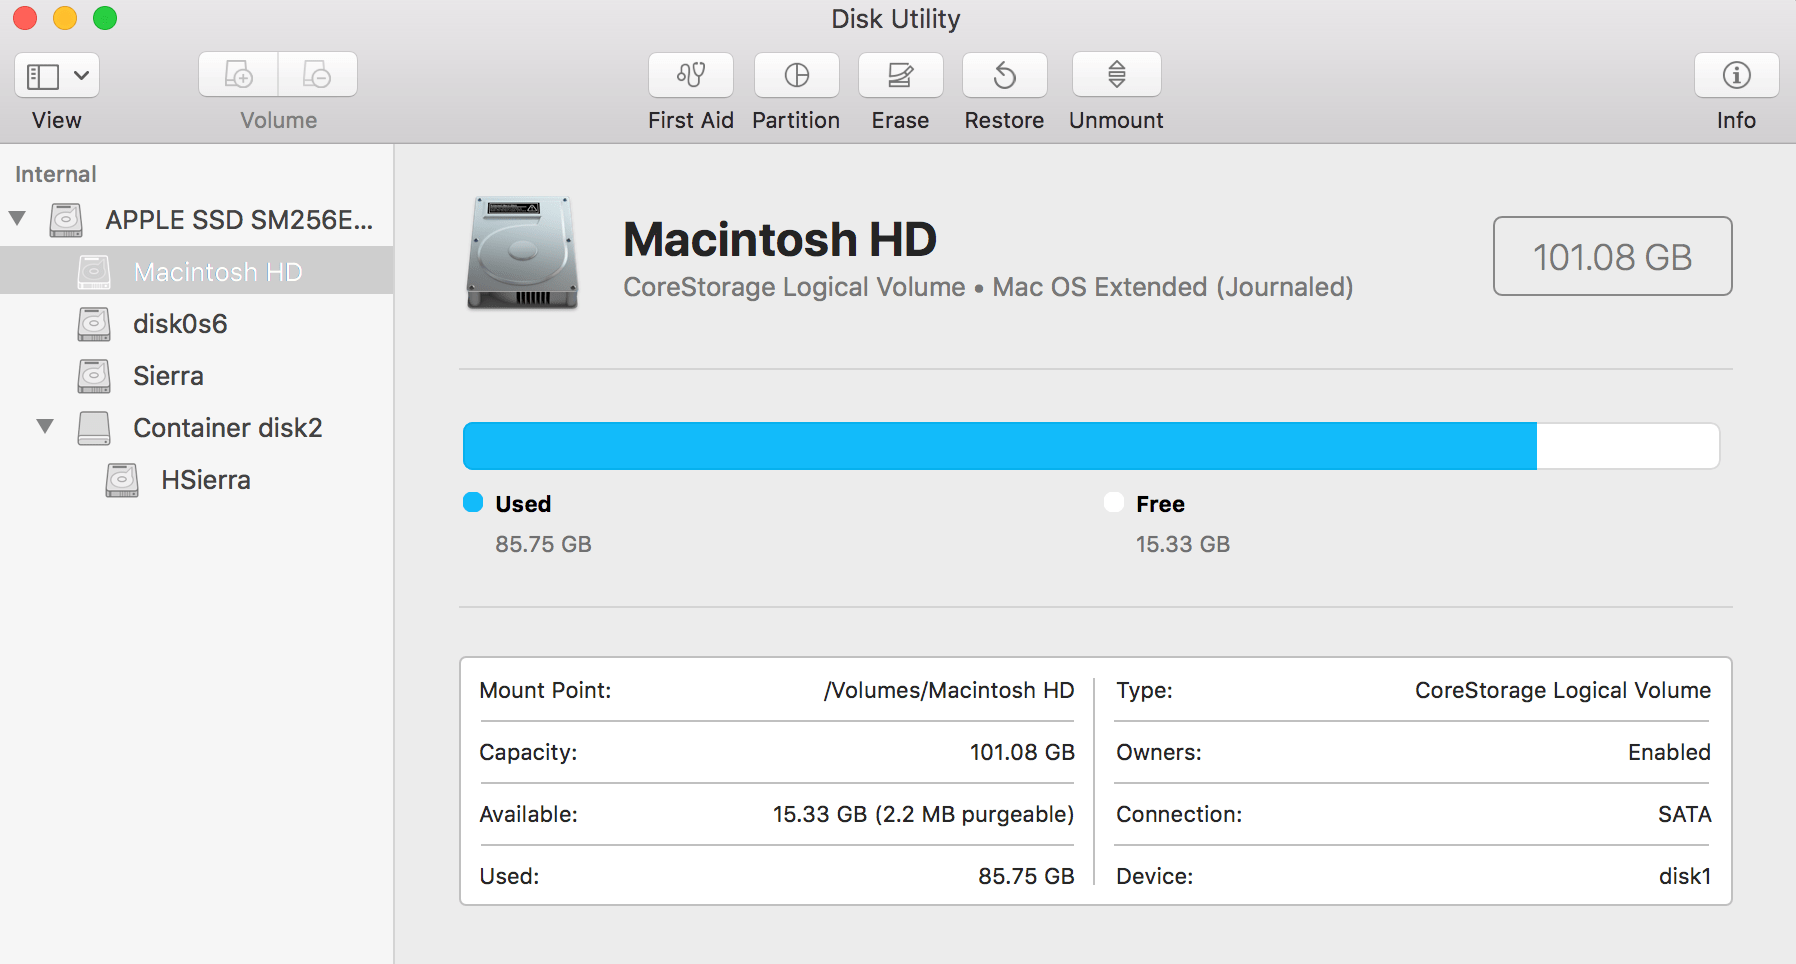 Volume format indicated in Disk Utility